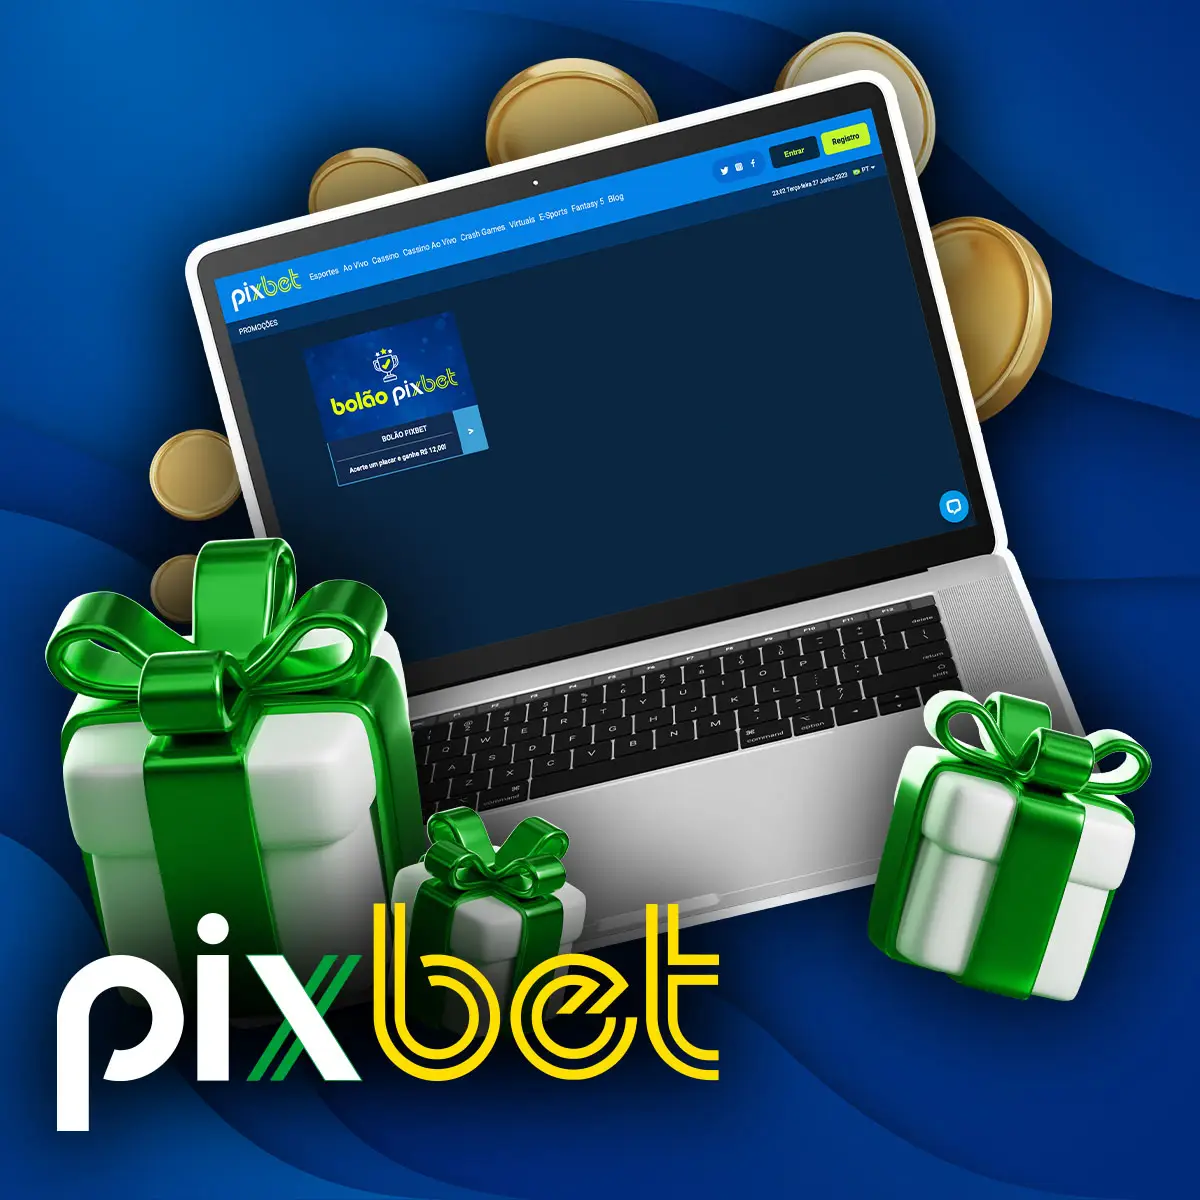 What Is PixBet APK: Baixe o Aplicativo PixBet para Dispositivos Android and How Does It Work?